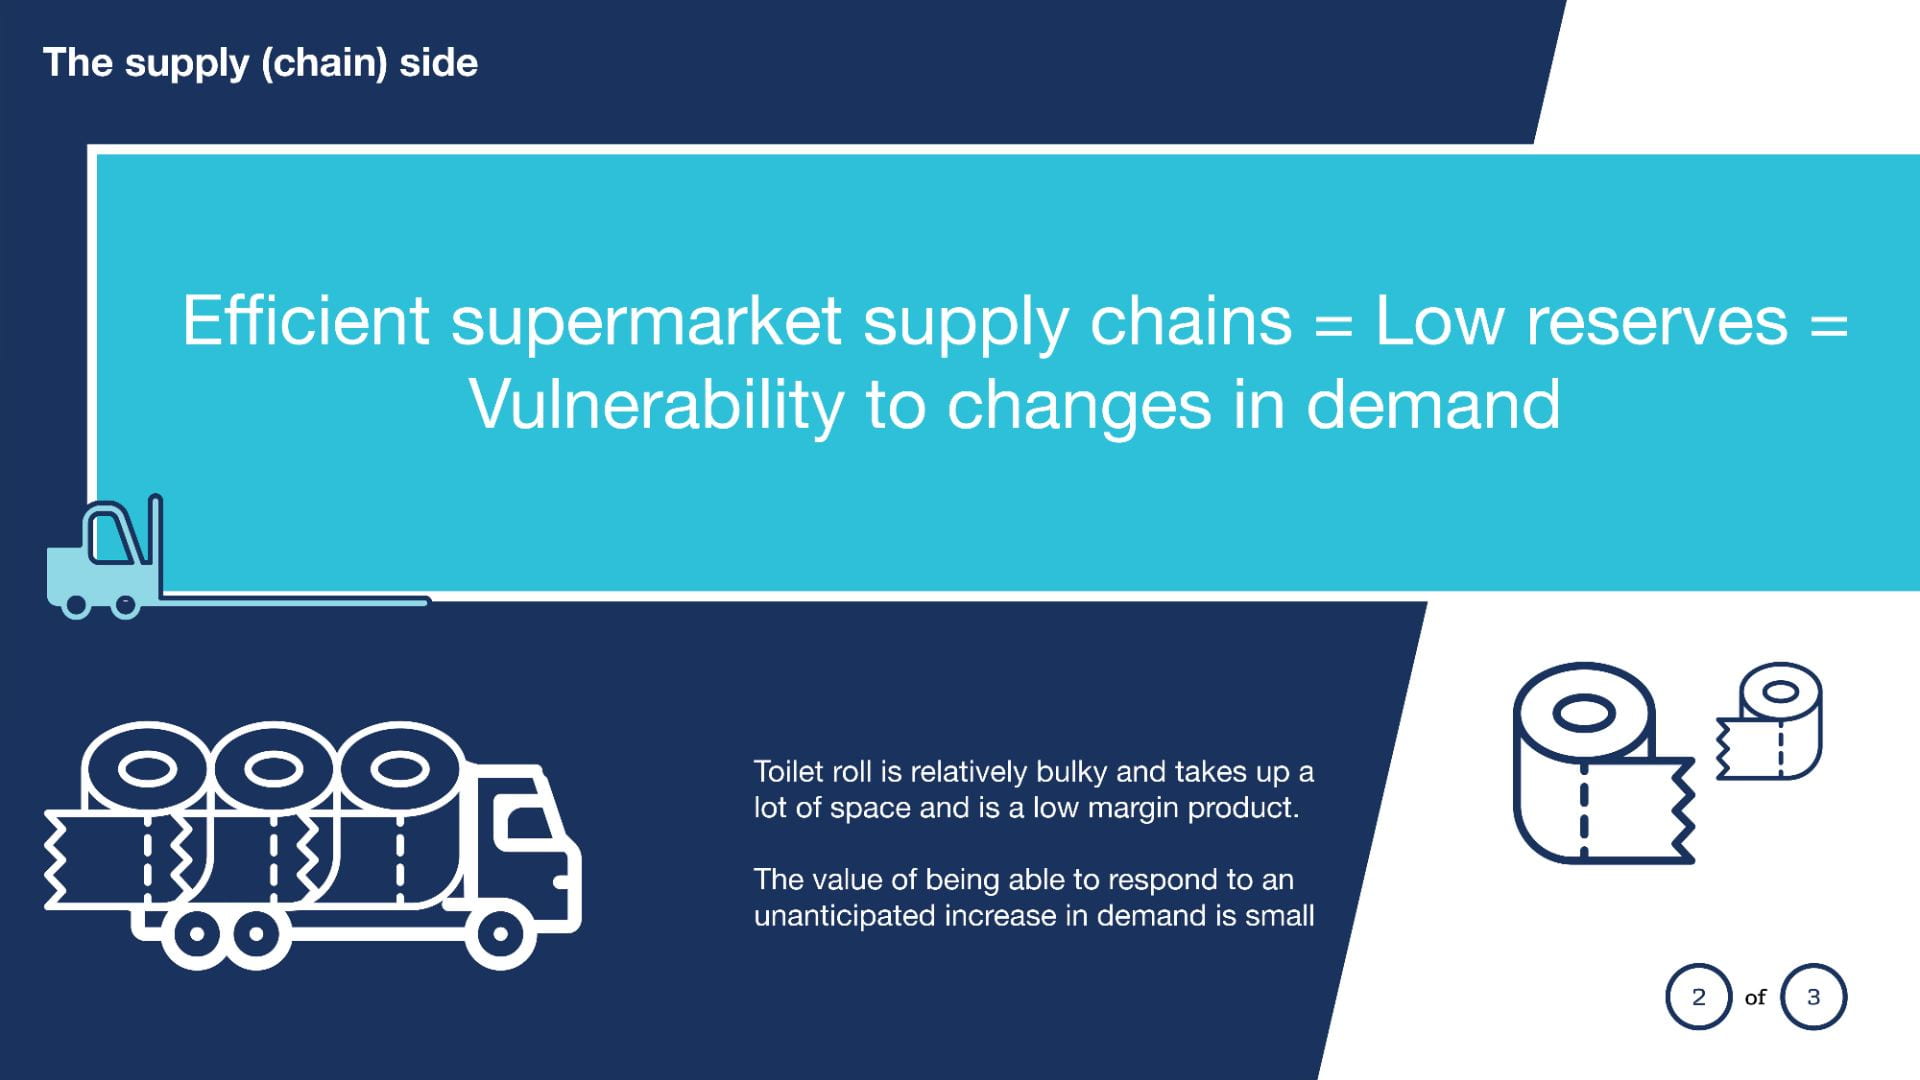 The supply (chain) side